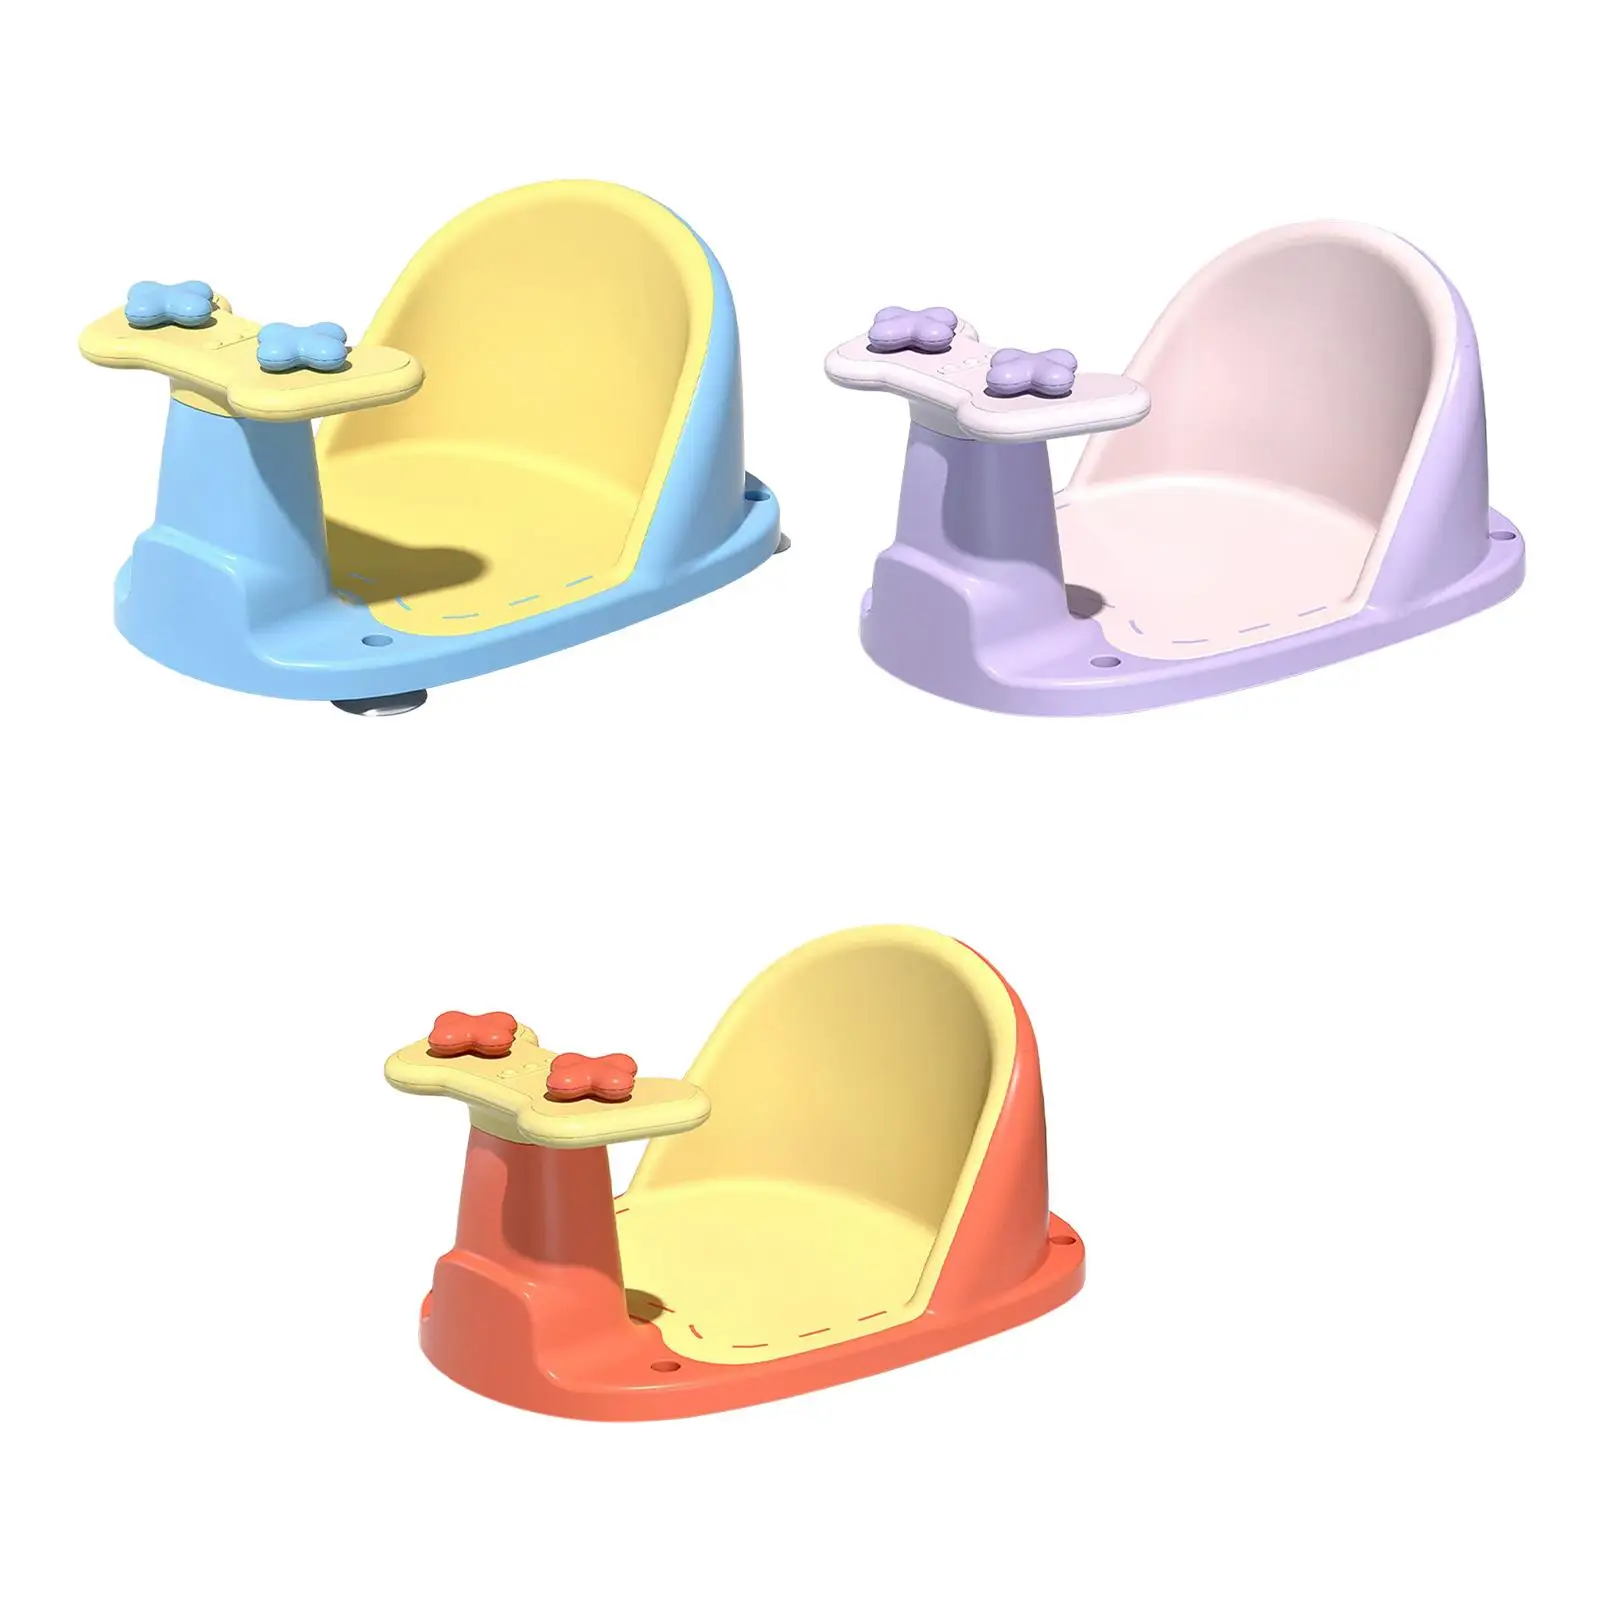 Anti Slip Baby Bathtub Seat Soft Seat Pad with Suction Cup Backrest Support Bathtub Chair for 6-18 Months Kids Toddlers Infant